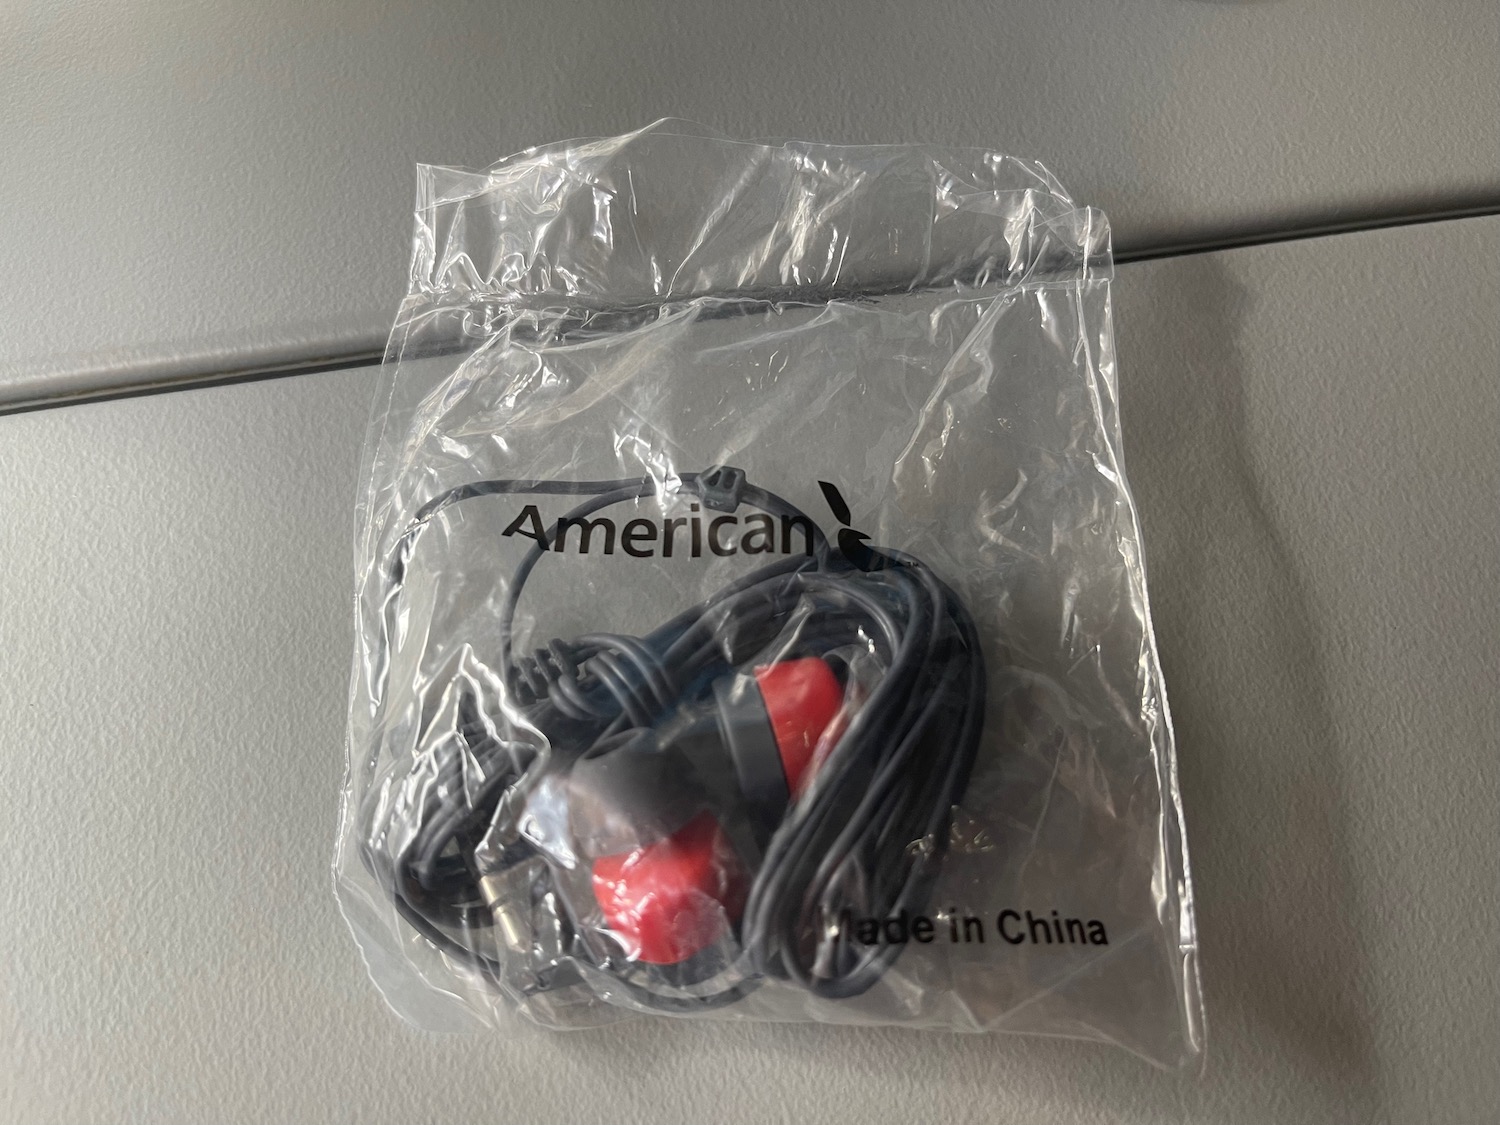 a black and red earbuds in a plastic bag